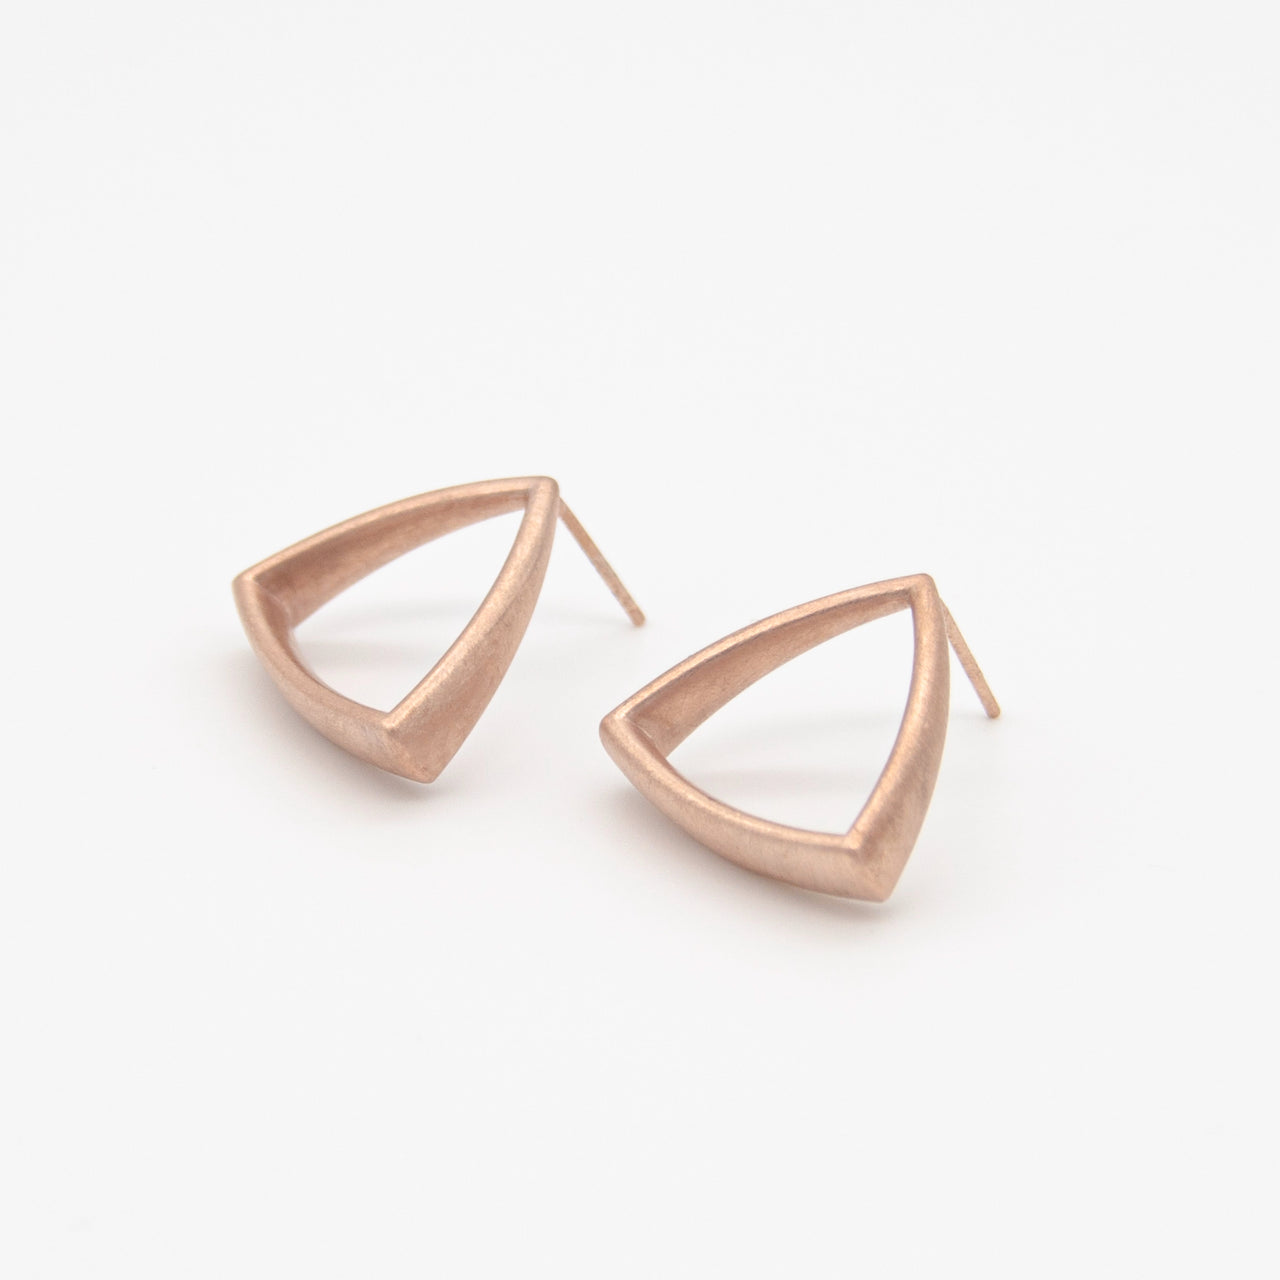 Curved Curves Triangle Earrings Rose Gold